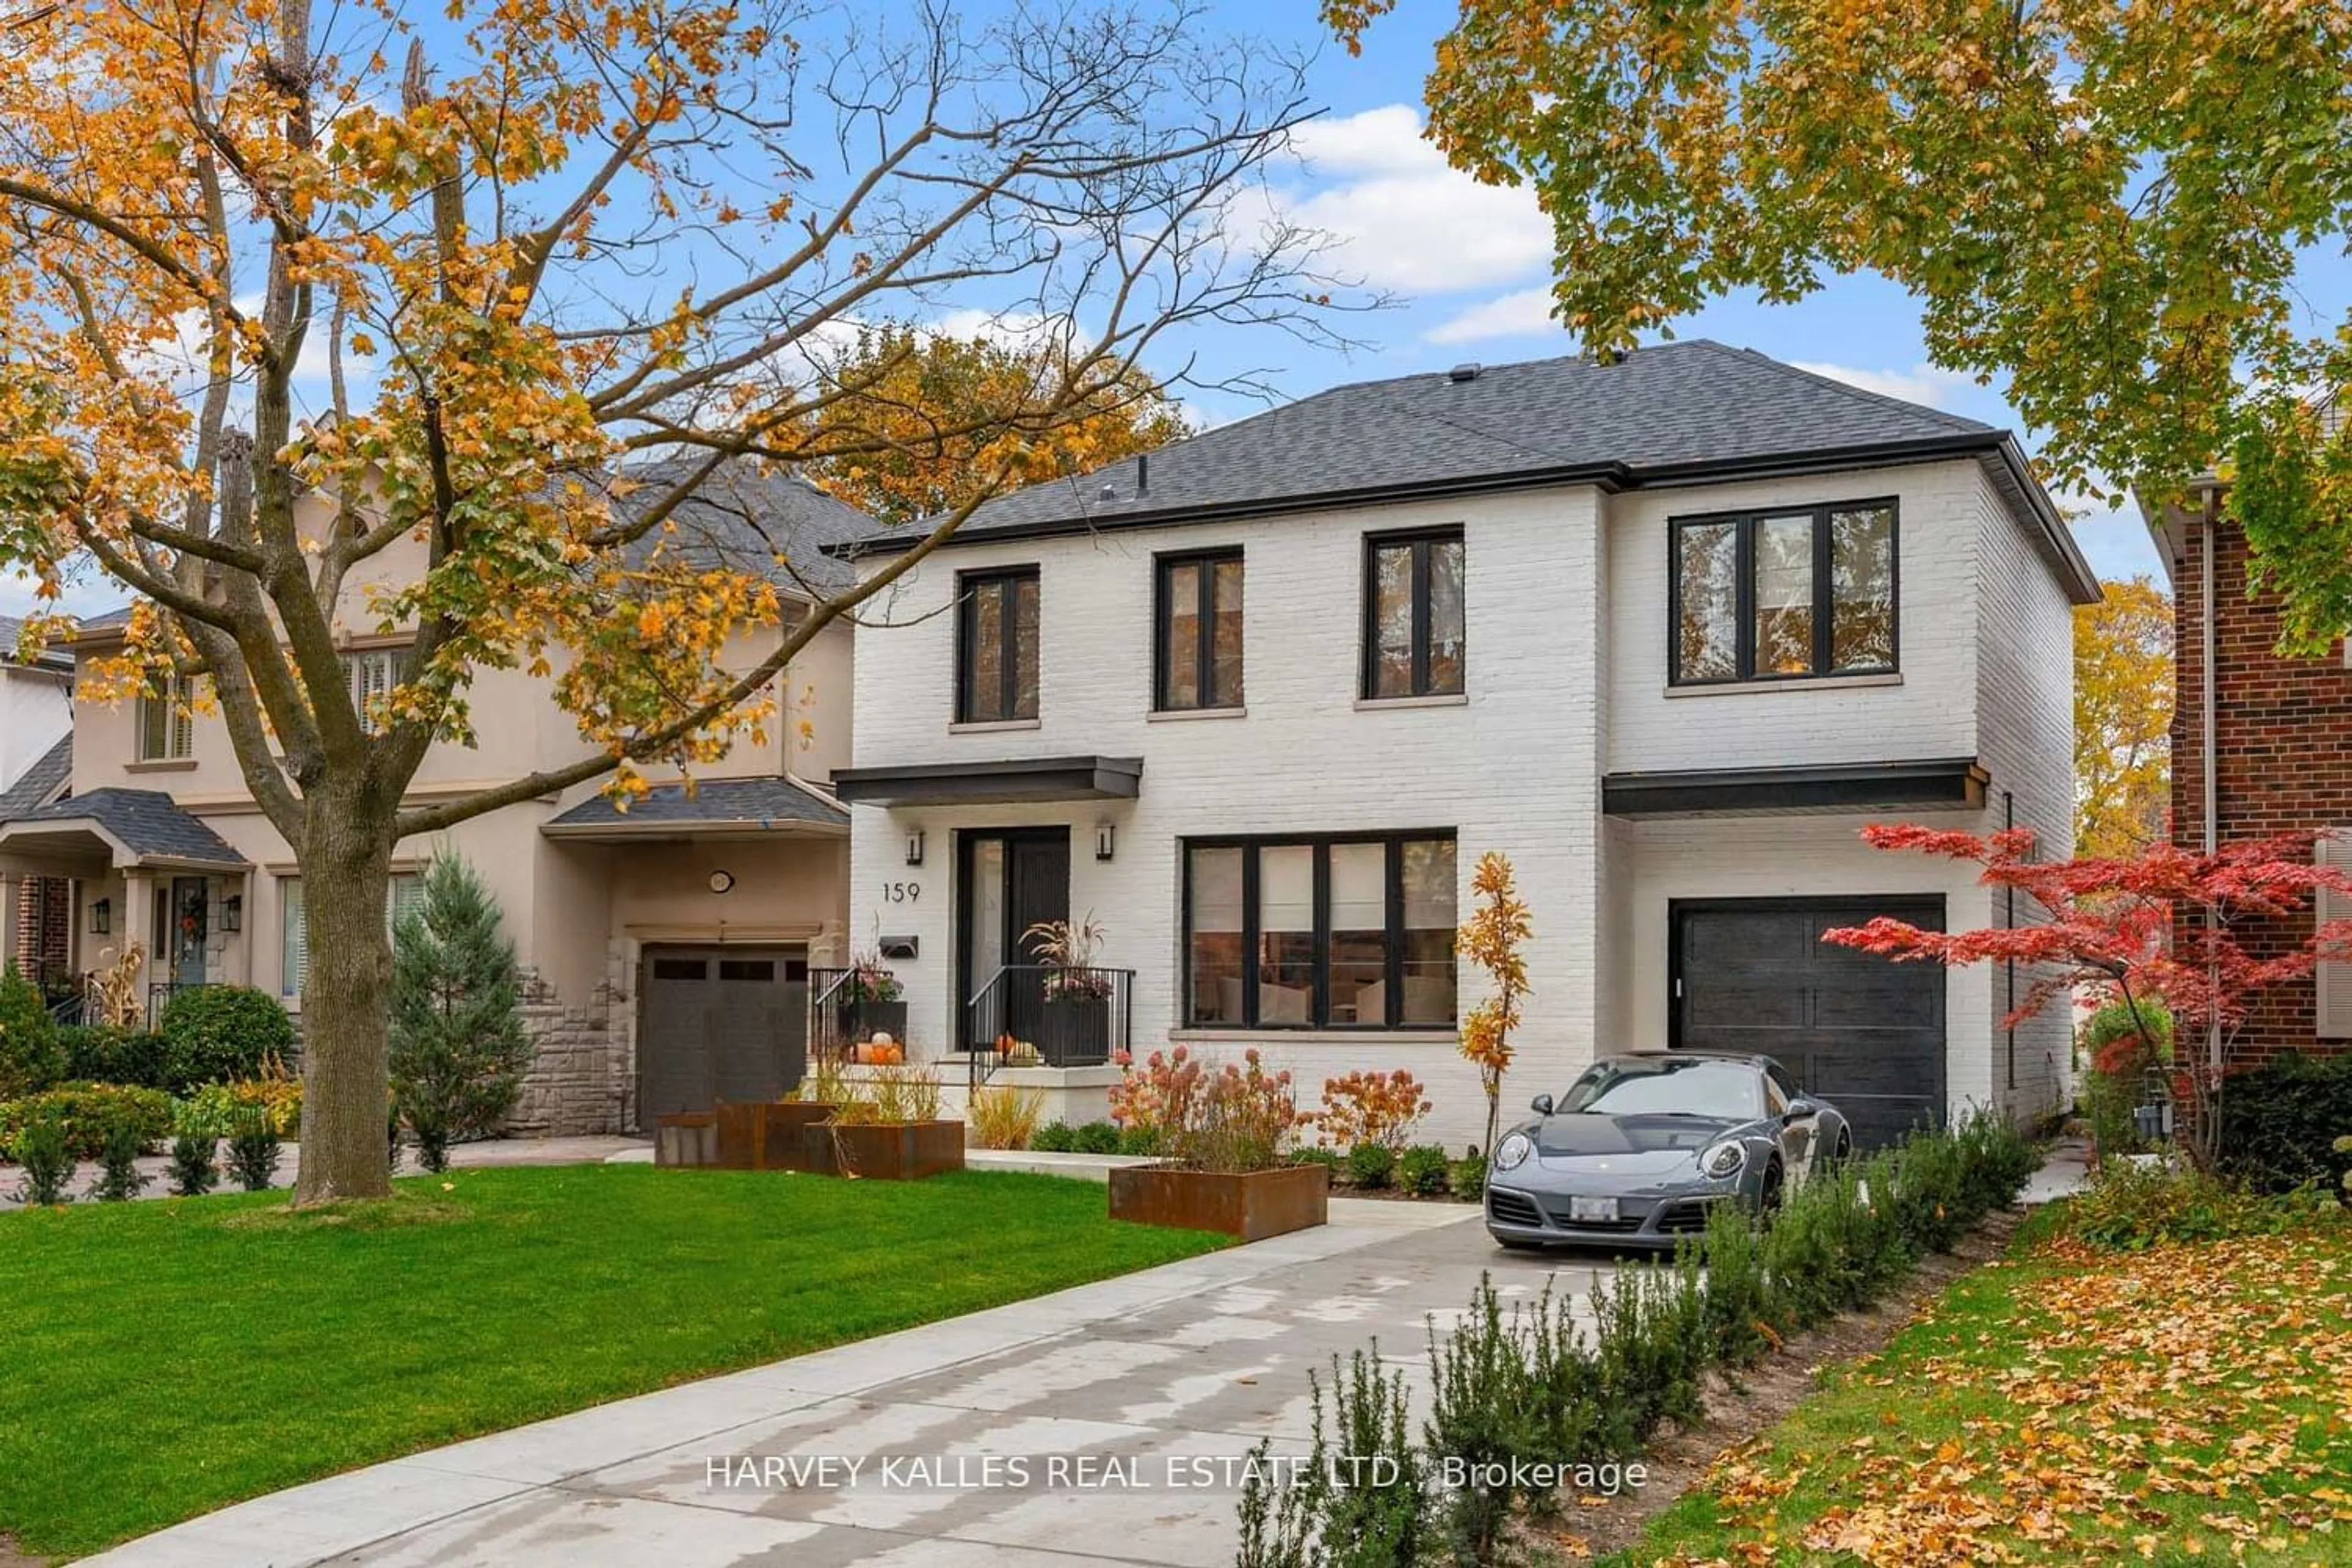 Home with stone exterior material for 159 Brentwood Rd, Toronto Ontario M8X 2C8